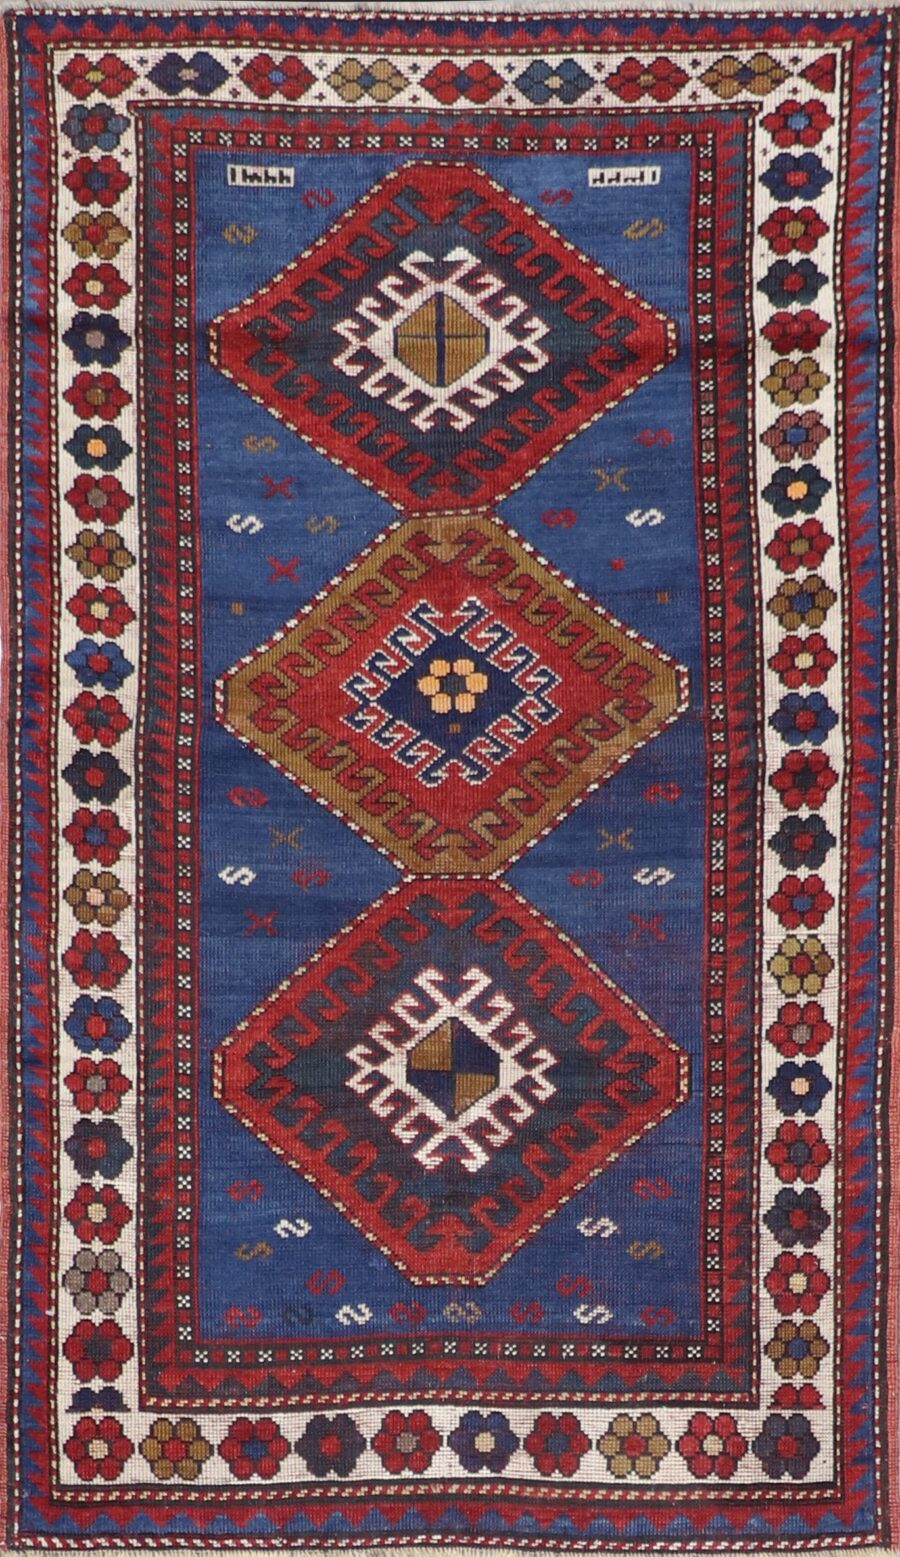 3’9”x6’8” Traditional Persian Tribal Blue & Red Wool Hand-Knotted Rug - Direct Rug Import | Rugs in Chicago, Indiana,South Bend,Granger